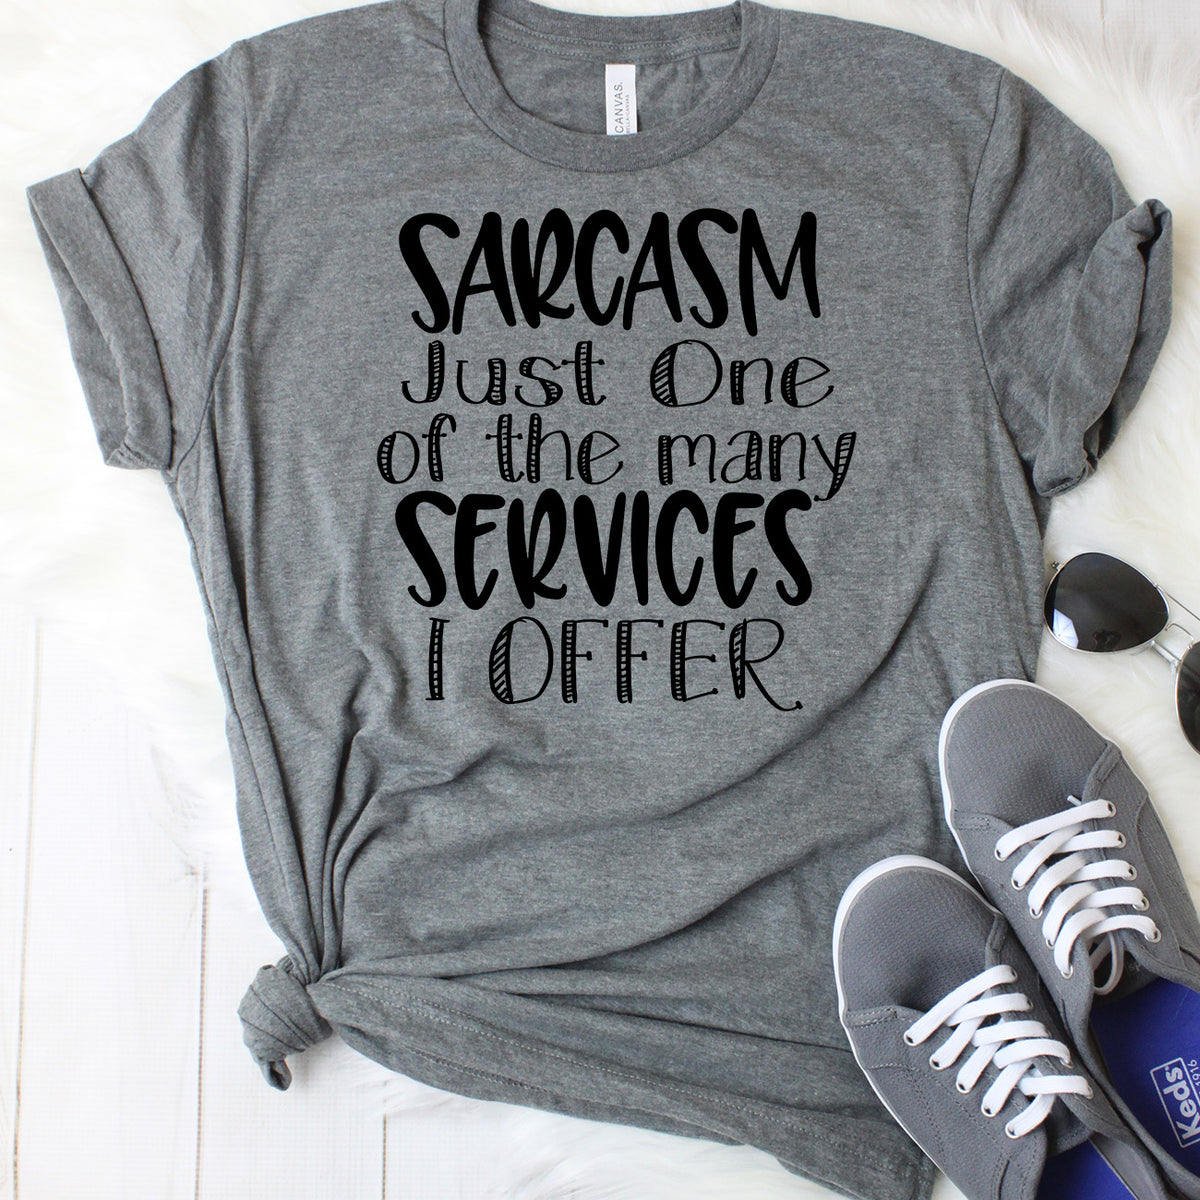 Sarcasm Just One of the Many Services I Offer T-Shirt